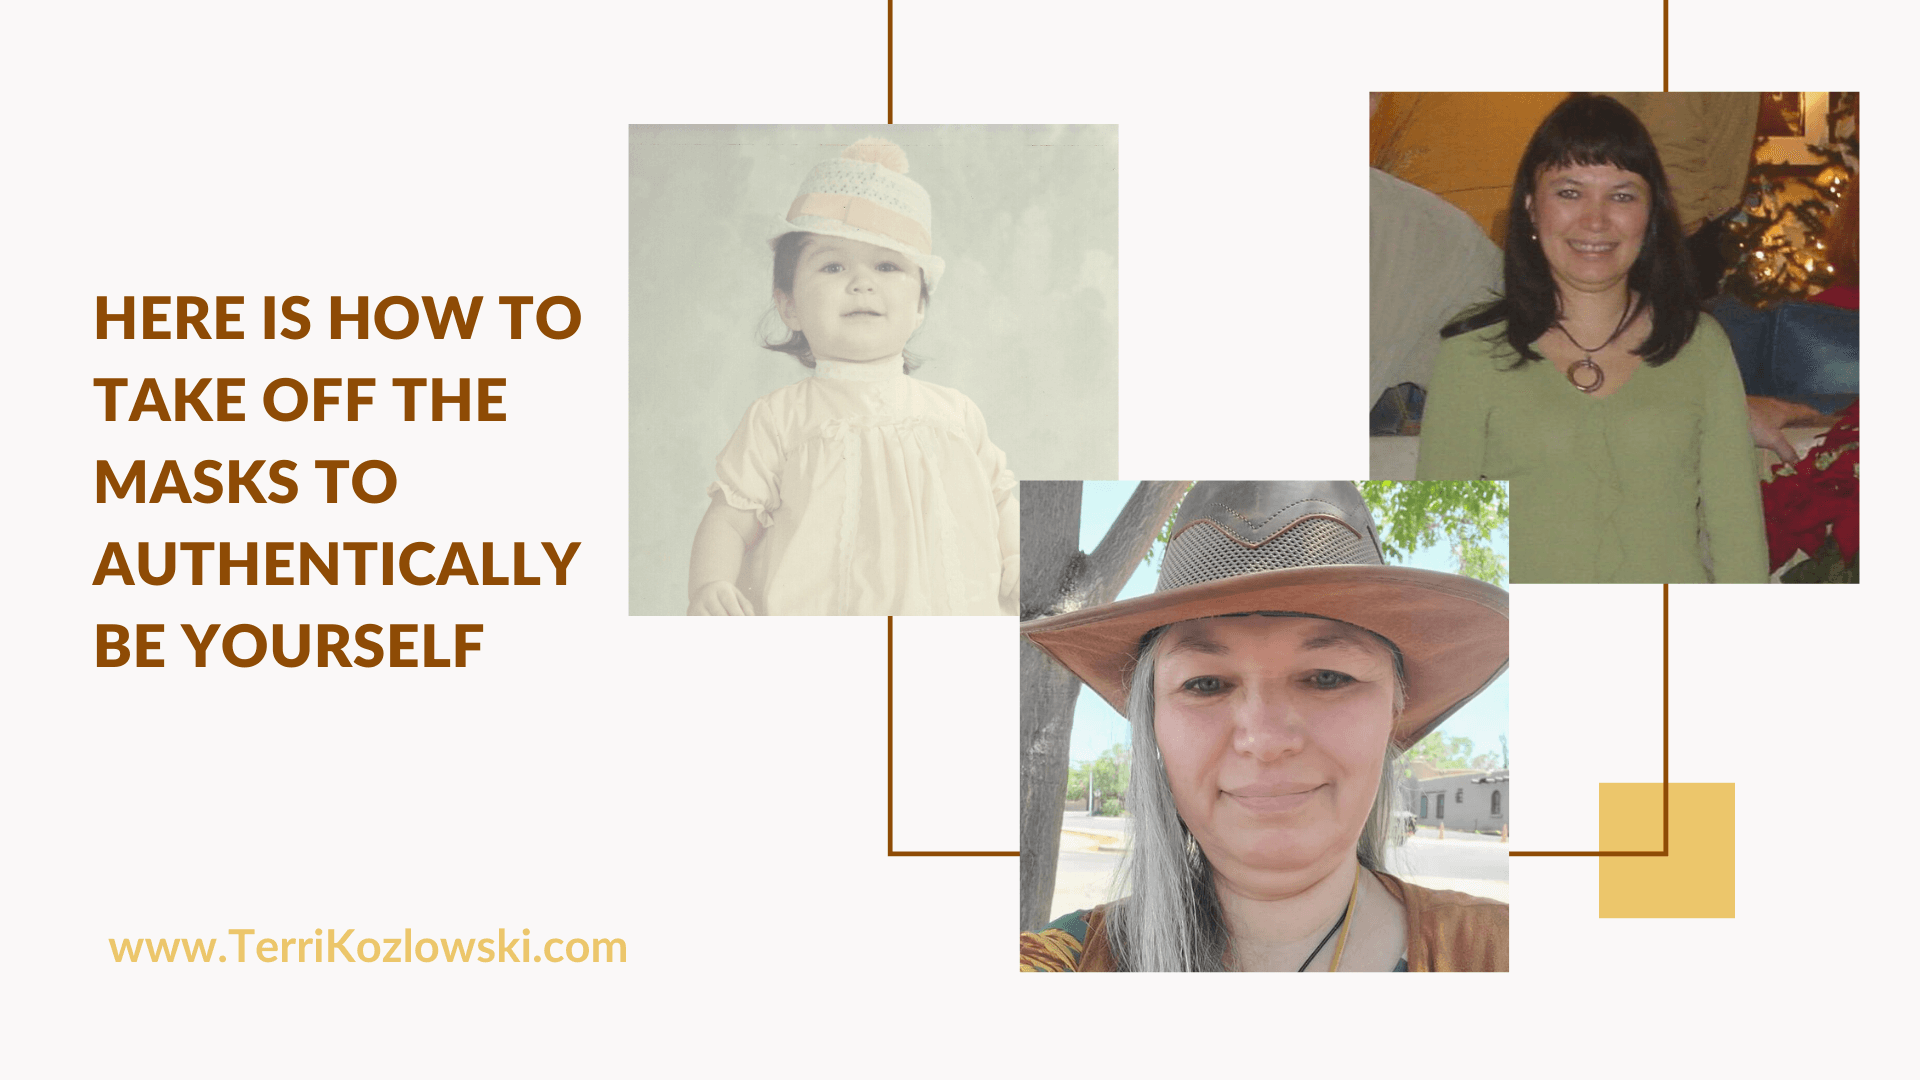 Here is How To Take Off The Masks To Authentically Be Yourself